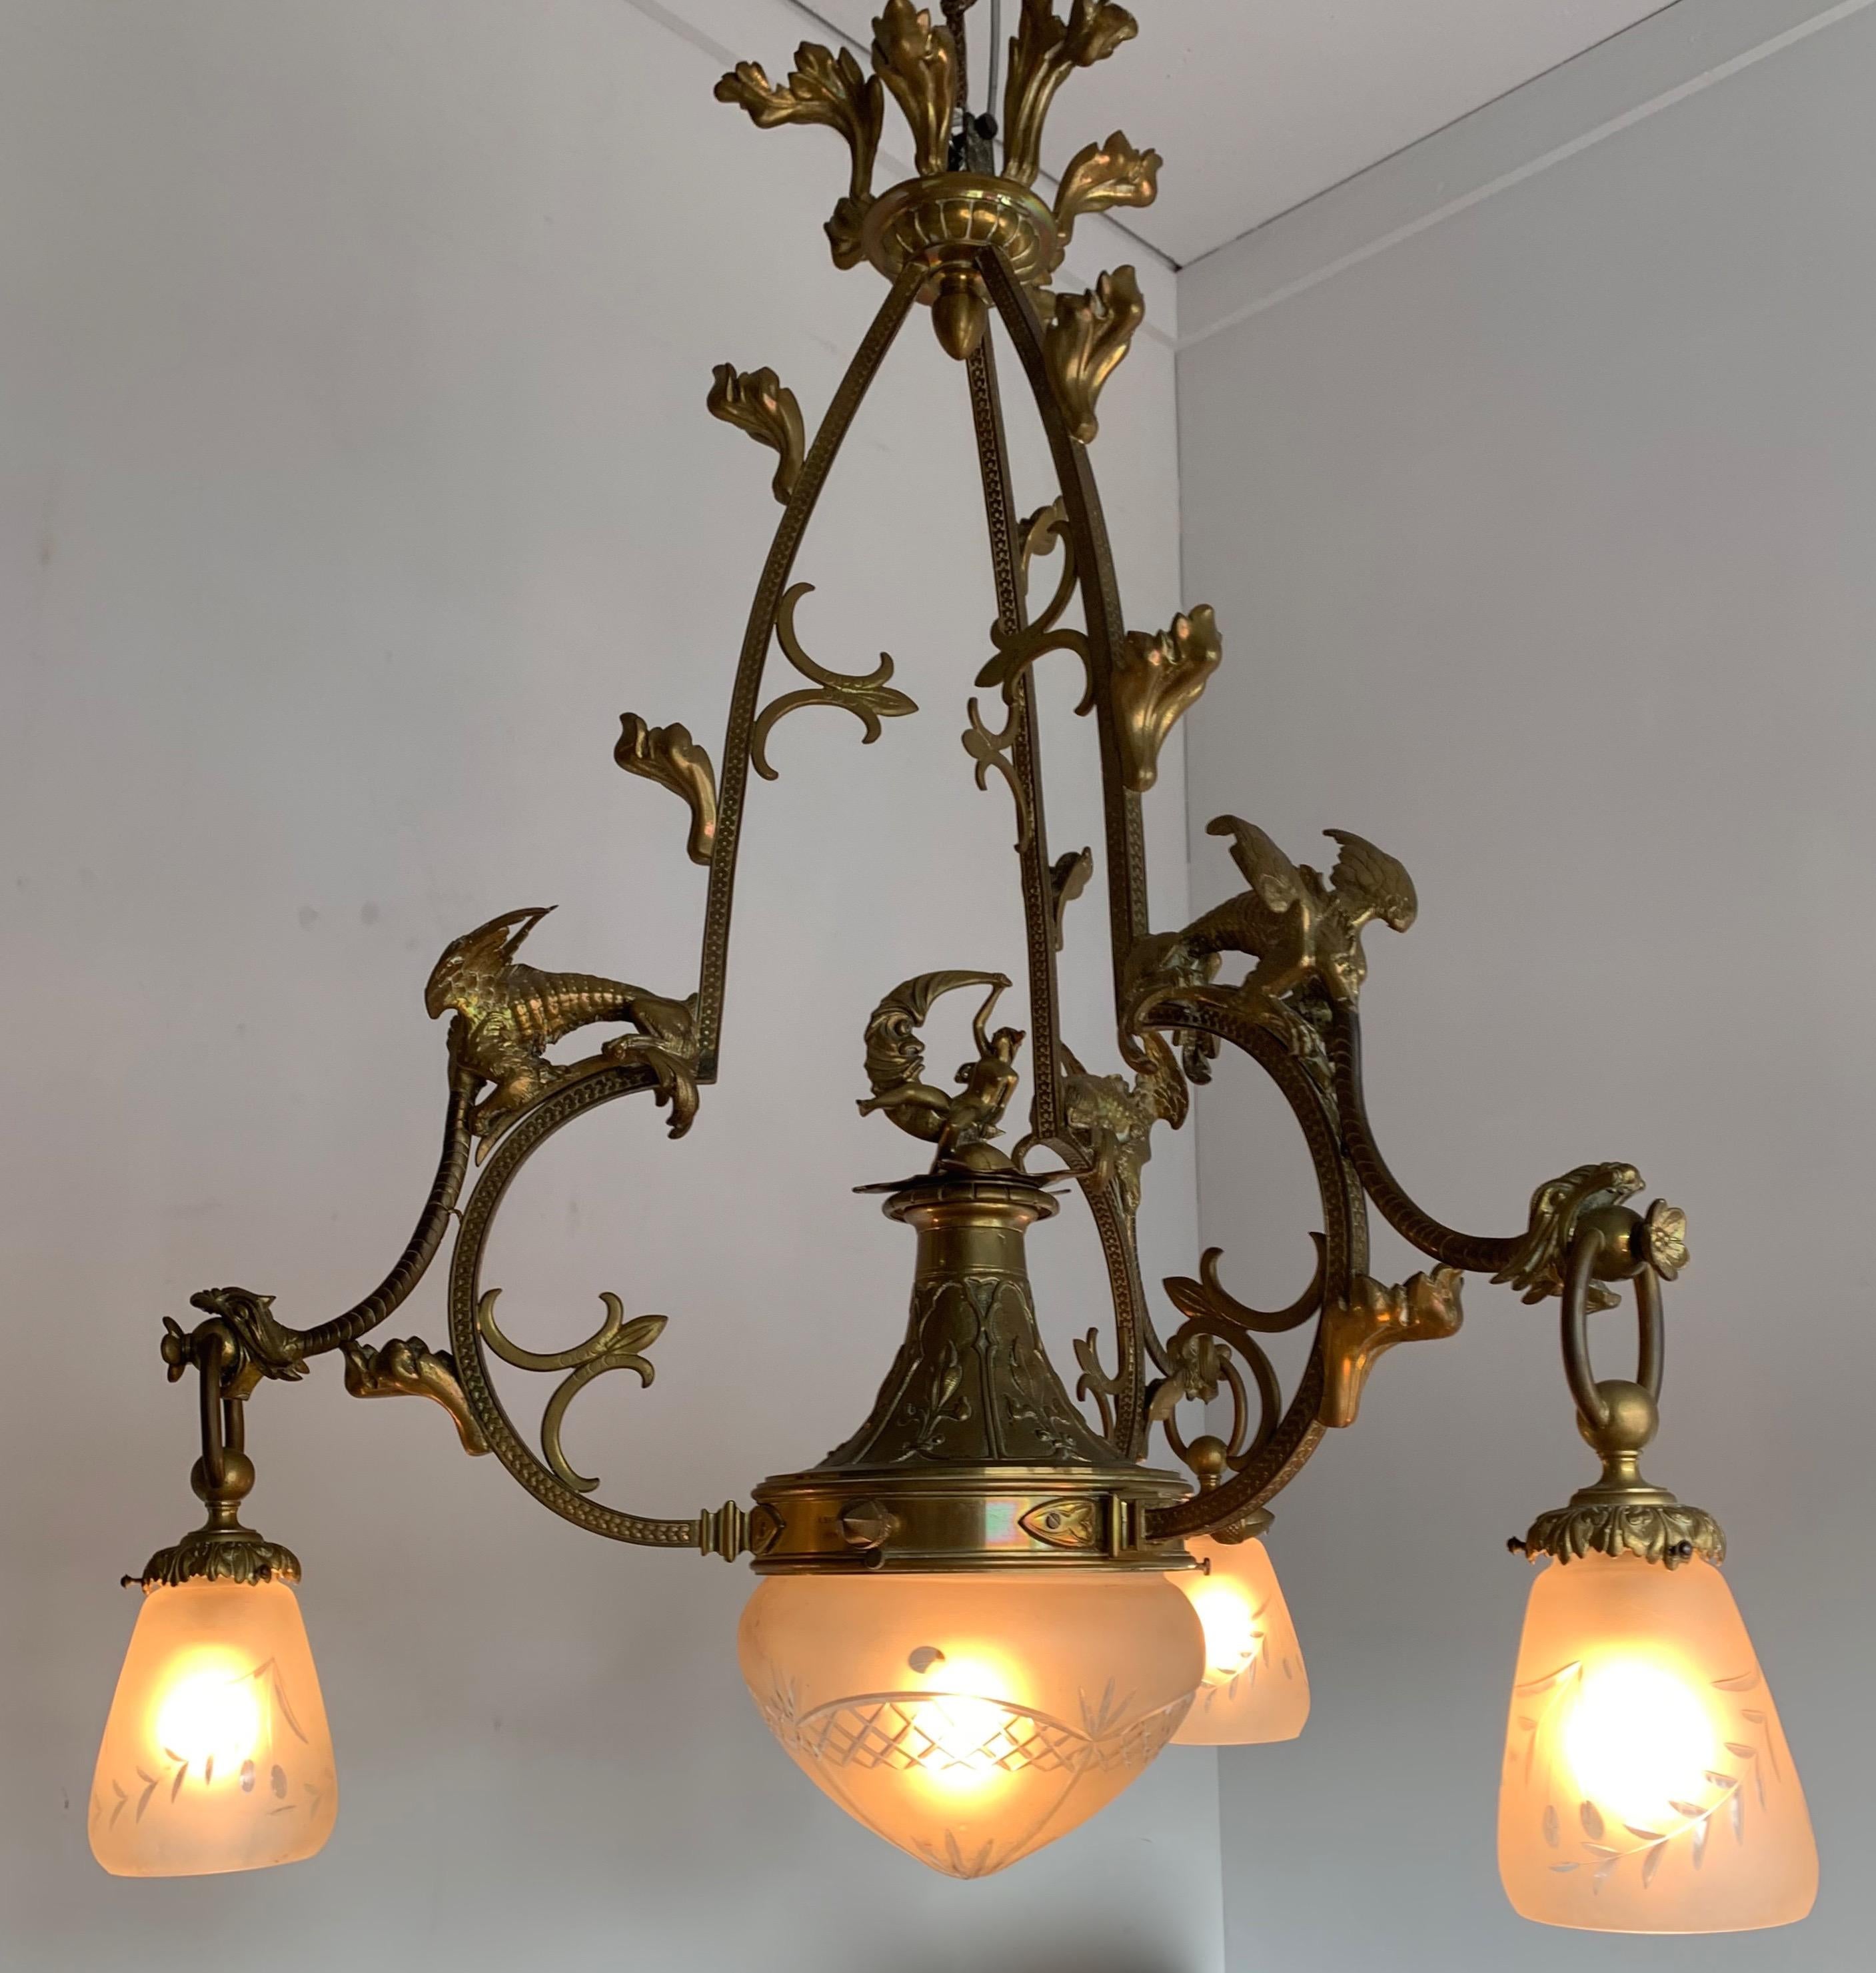 Stunning and amazingly sculptural Gothic Art chandelier.

If you are an antique collector with an eye for the extra special then this four light bronze chandelier could be right up your ally. This incredibly well made chandelier consists of three